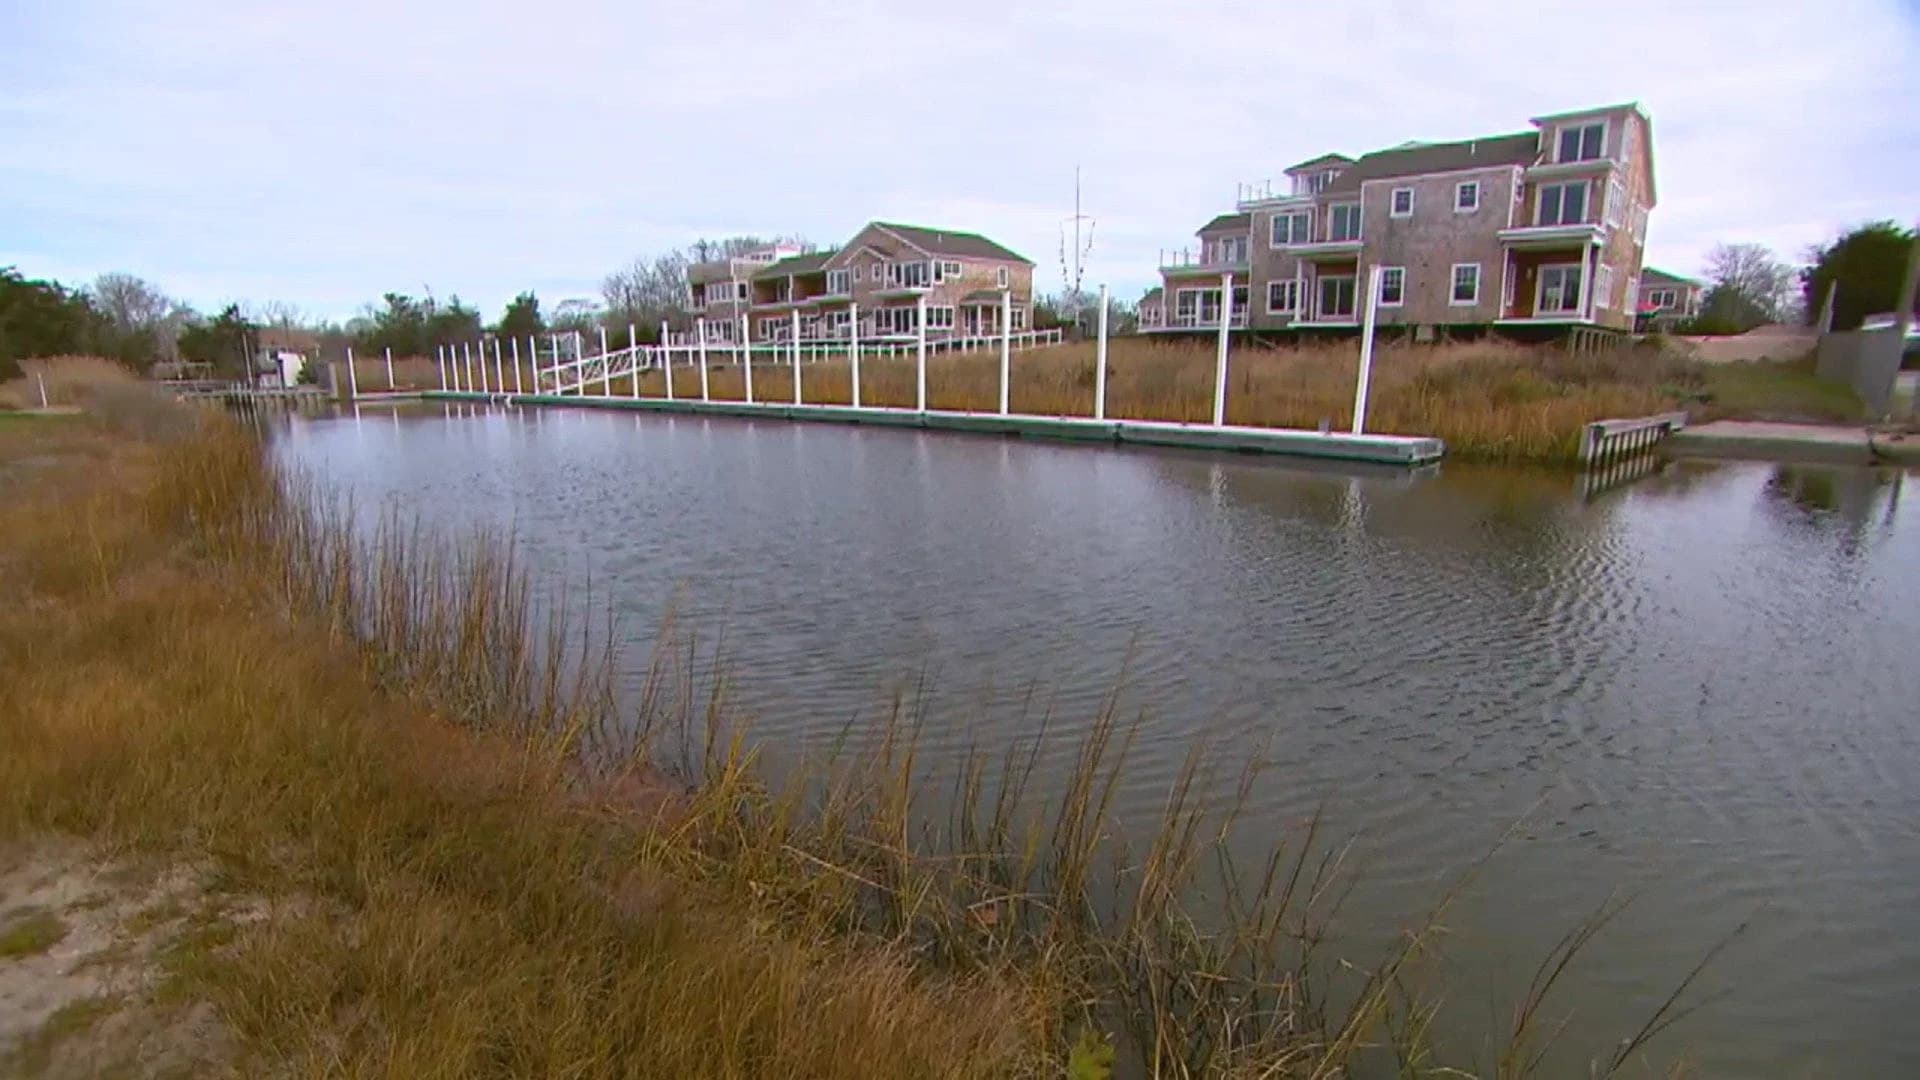 Permit to Pollute: Legal loophole lets some property owners skirt wastewater codes